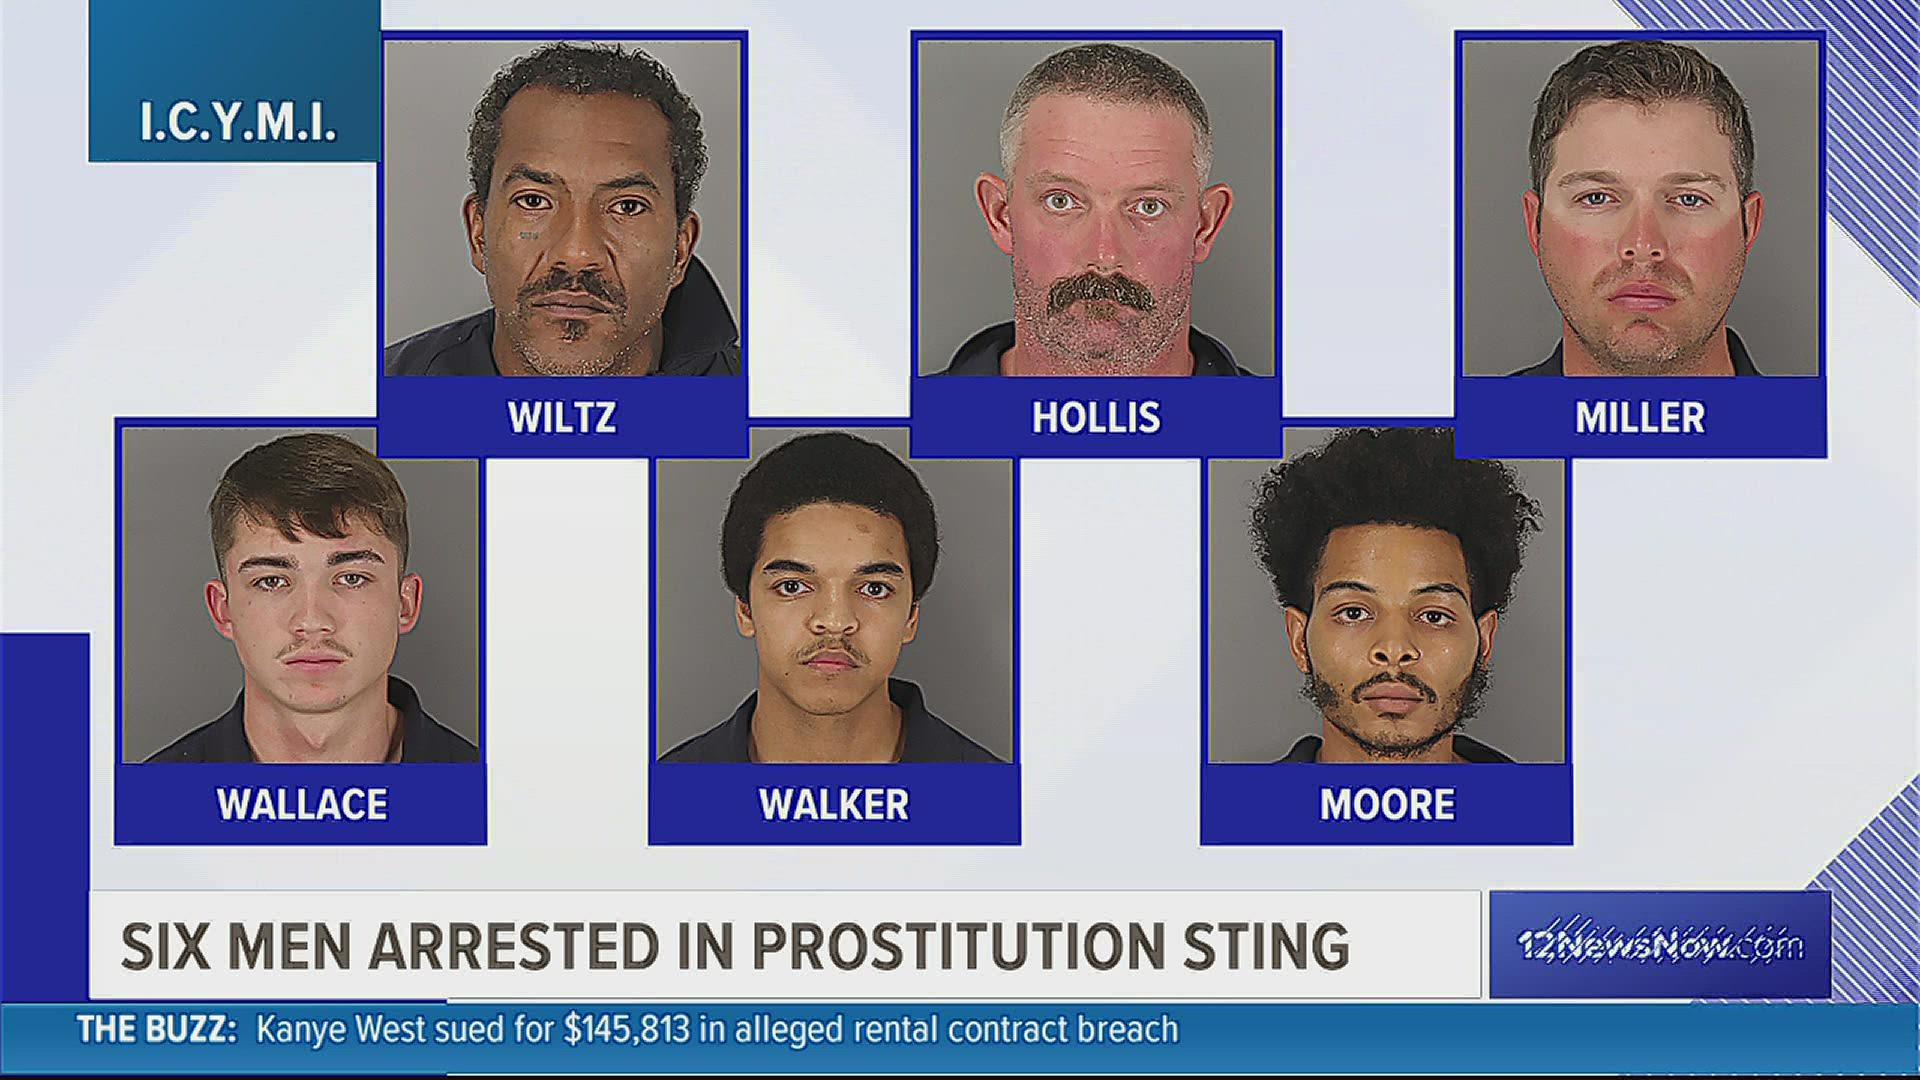 I C Y M I Six Men Arrested Facing Felony Charged After Texas Prostitution Sting